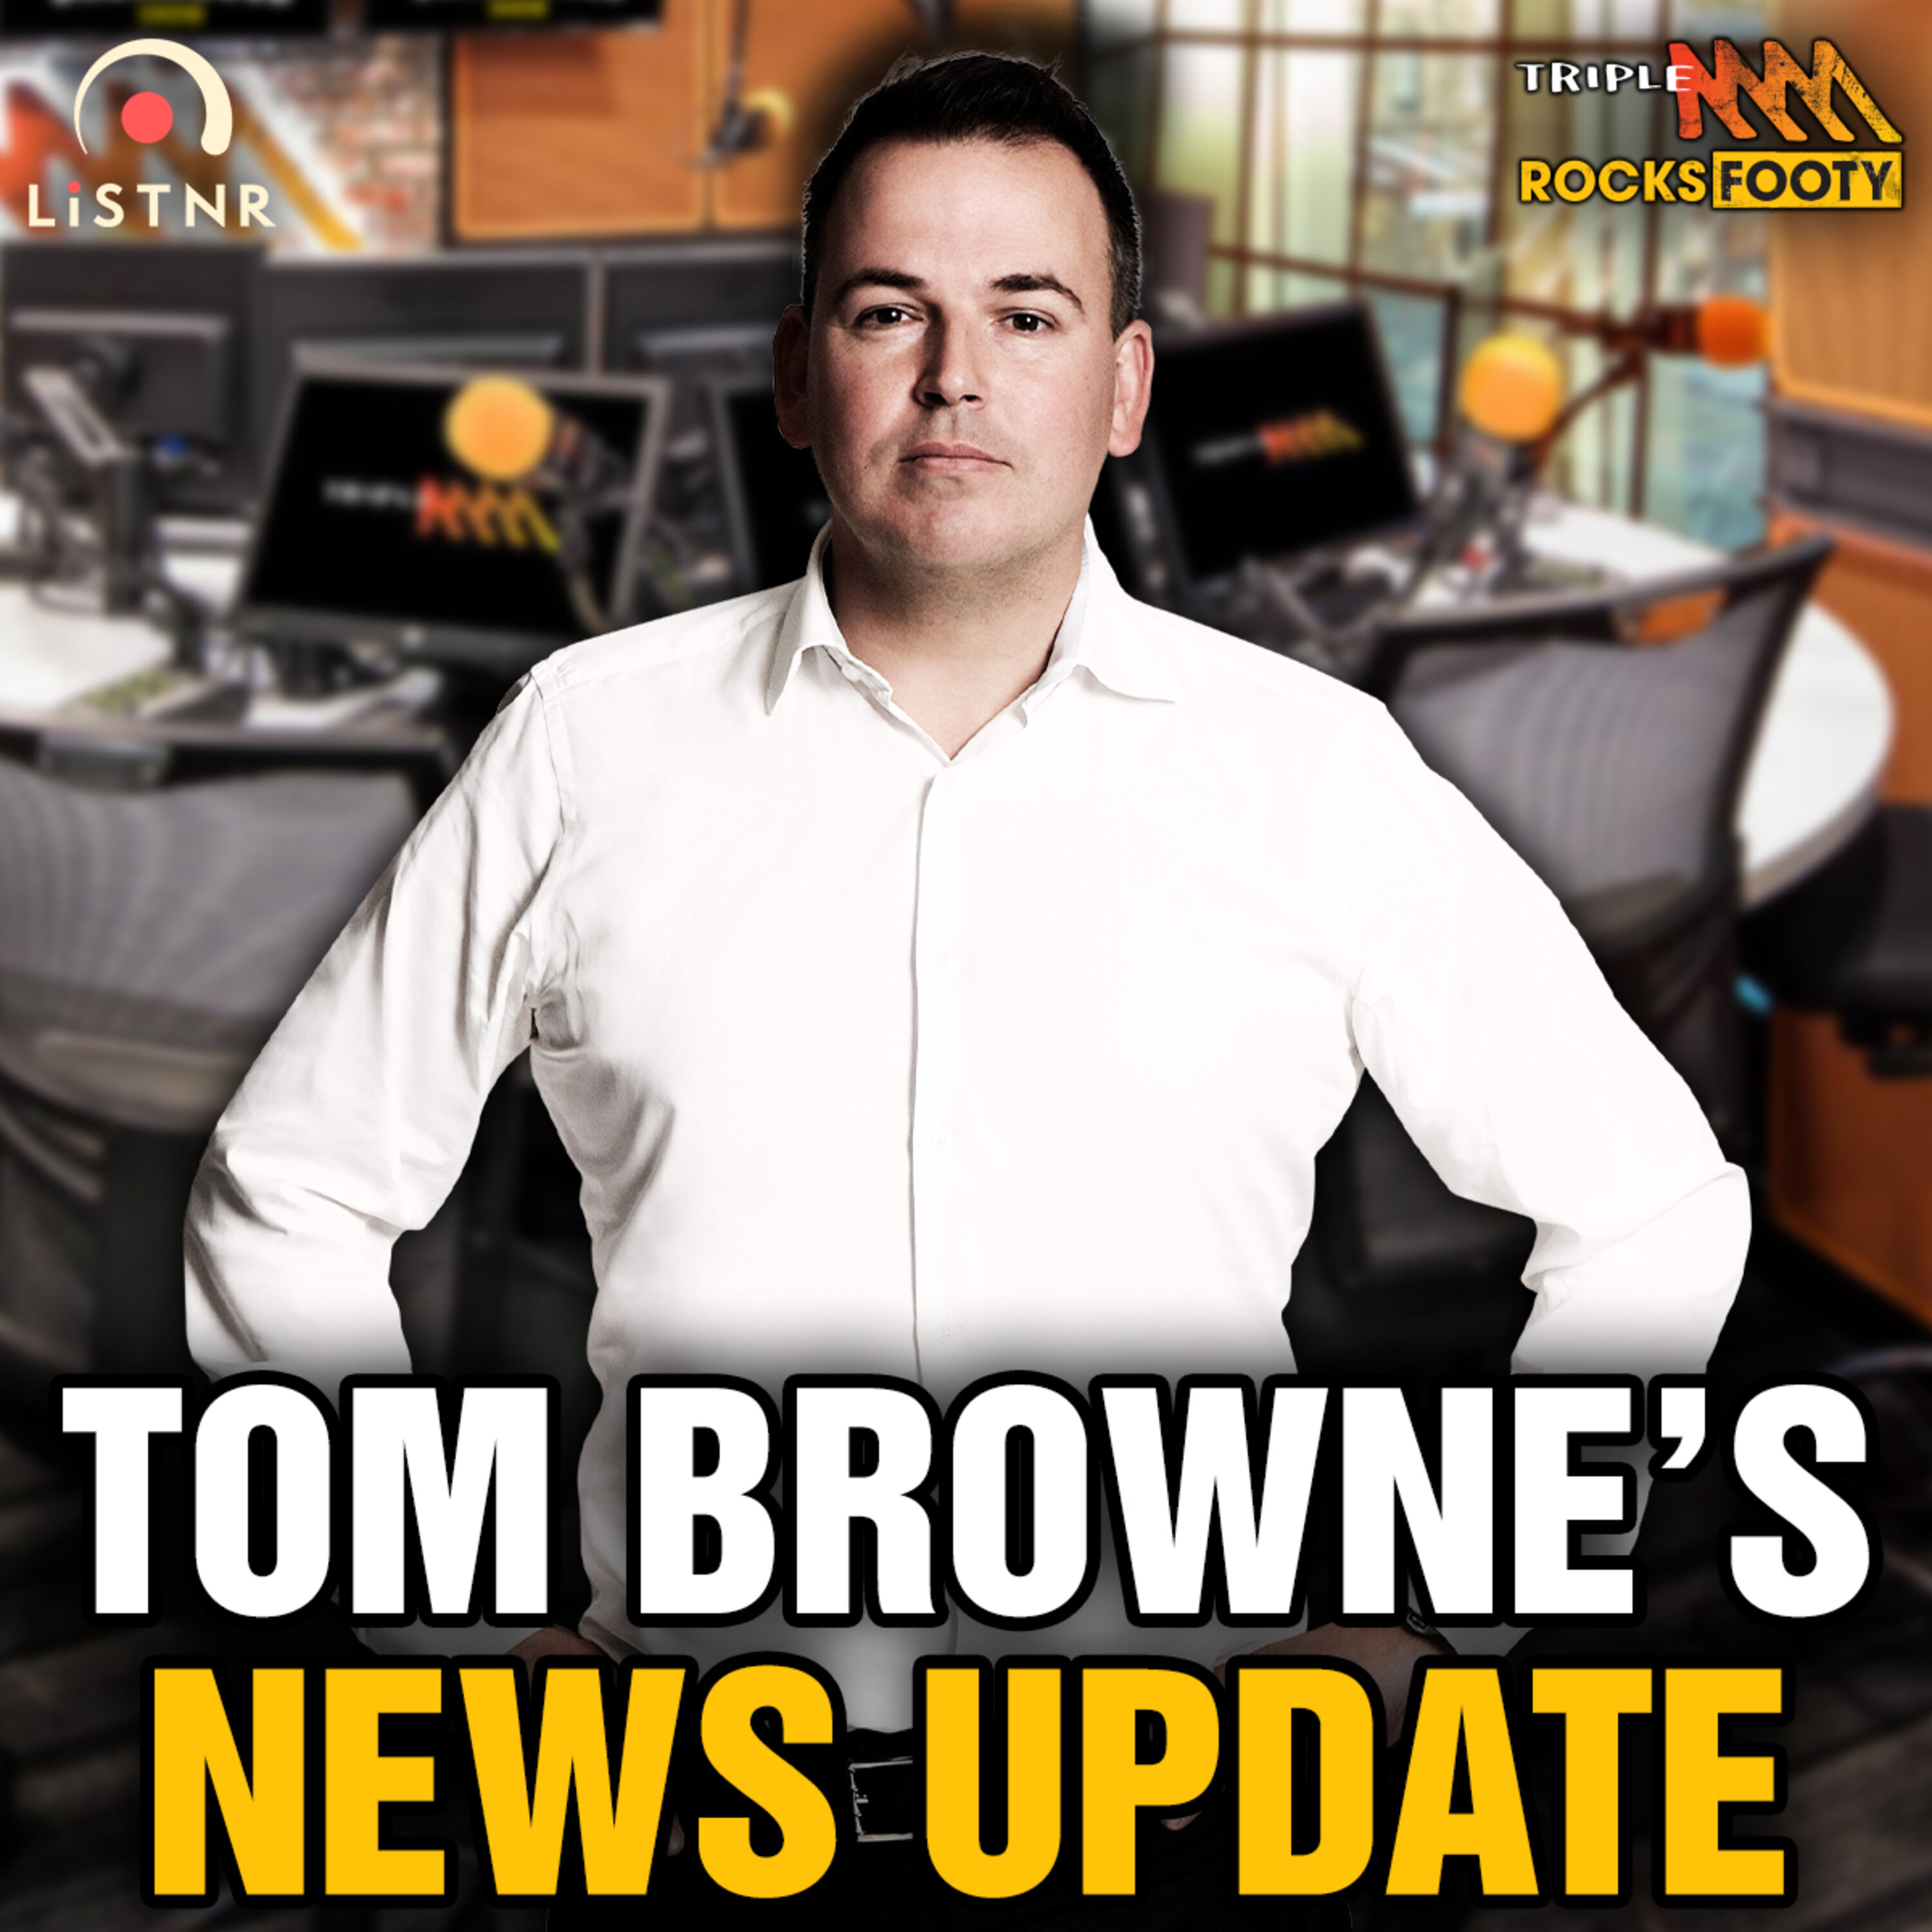 Tom Browne's News | Clarko's slated return, intrigue about Tom Mitchell's fitness, will the bye change?